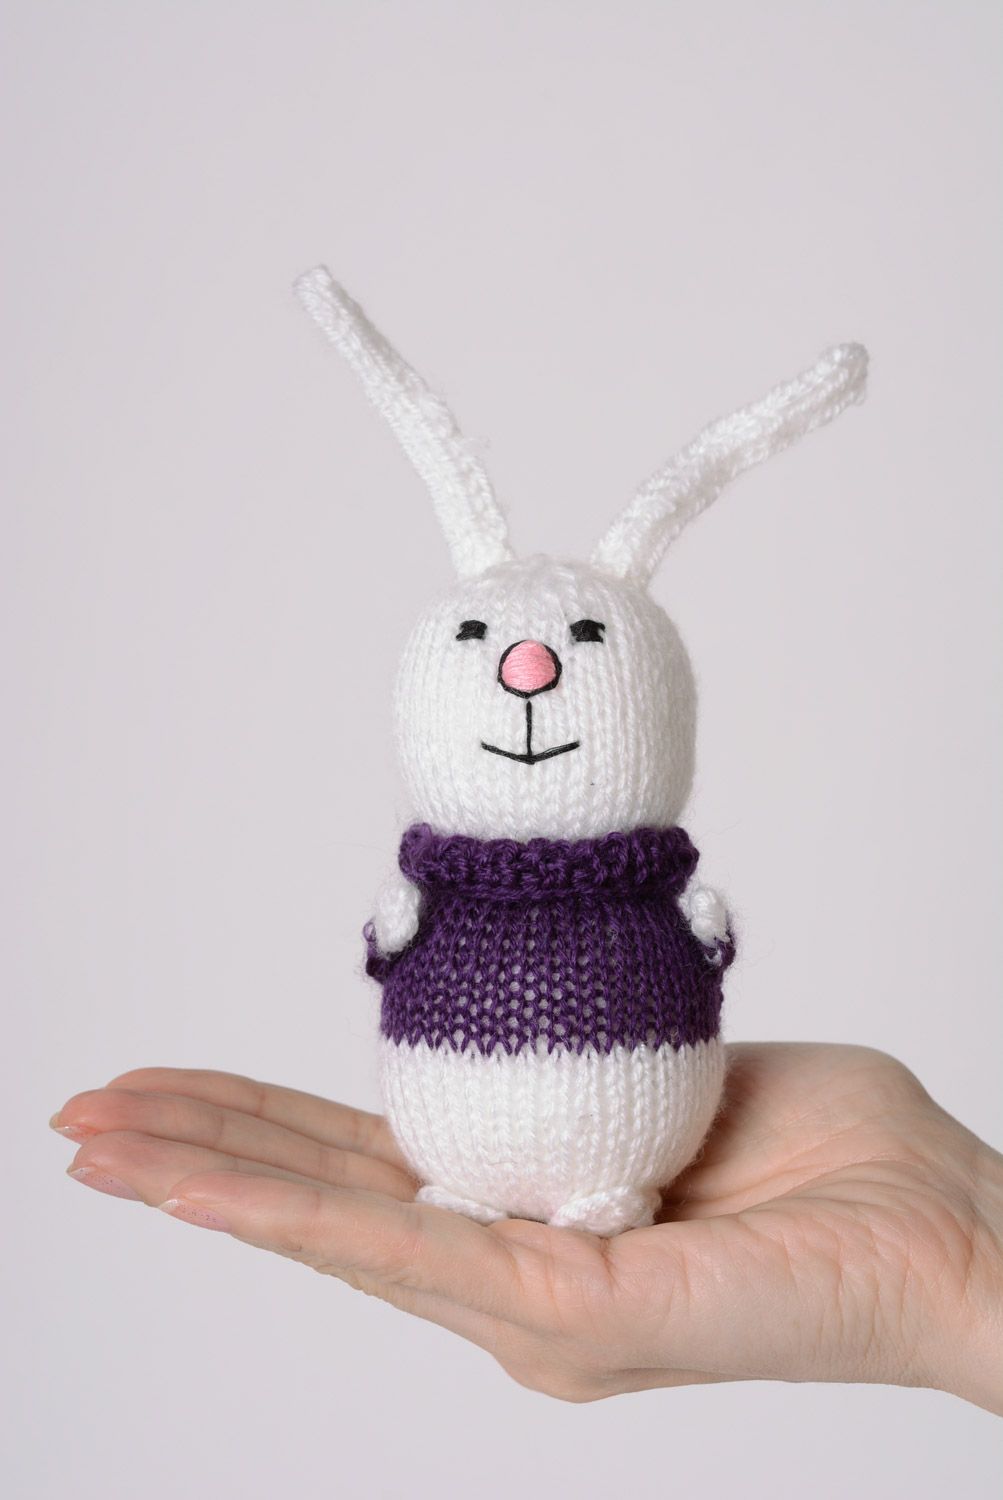 Handmade knitted soft toy white hare in violet sweater photo 3